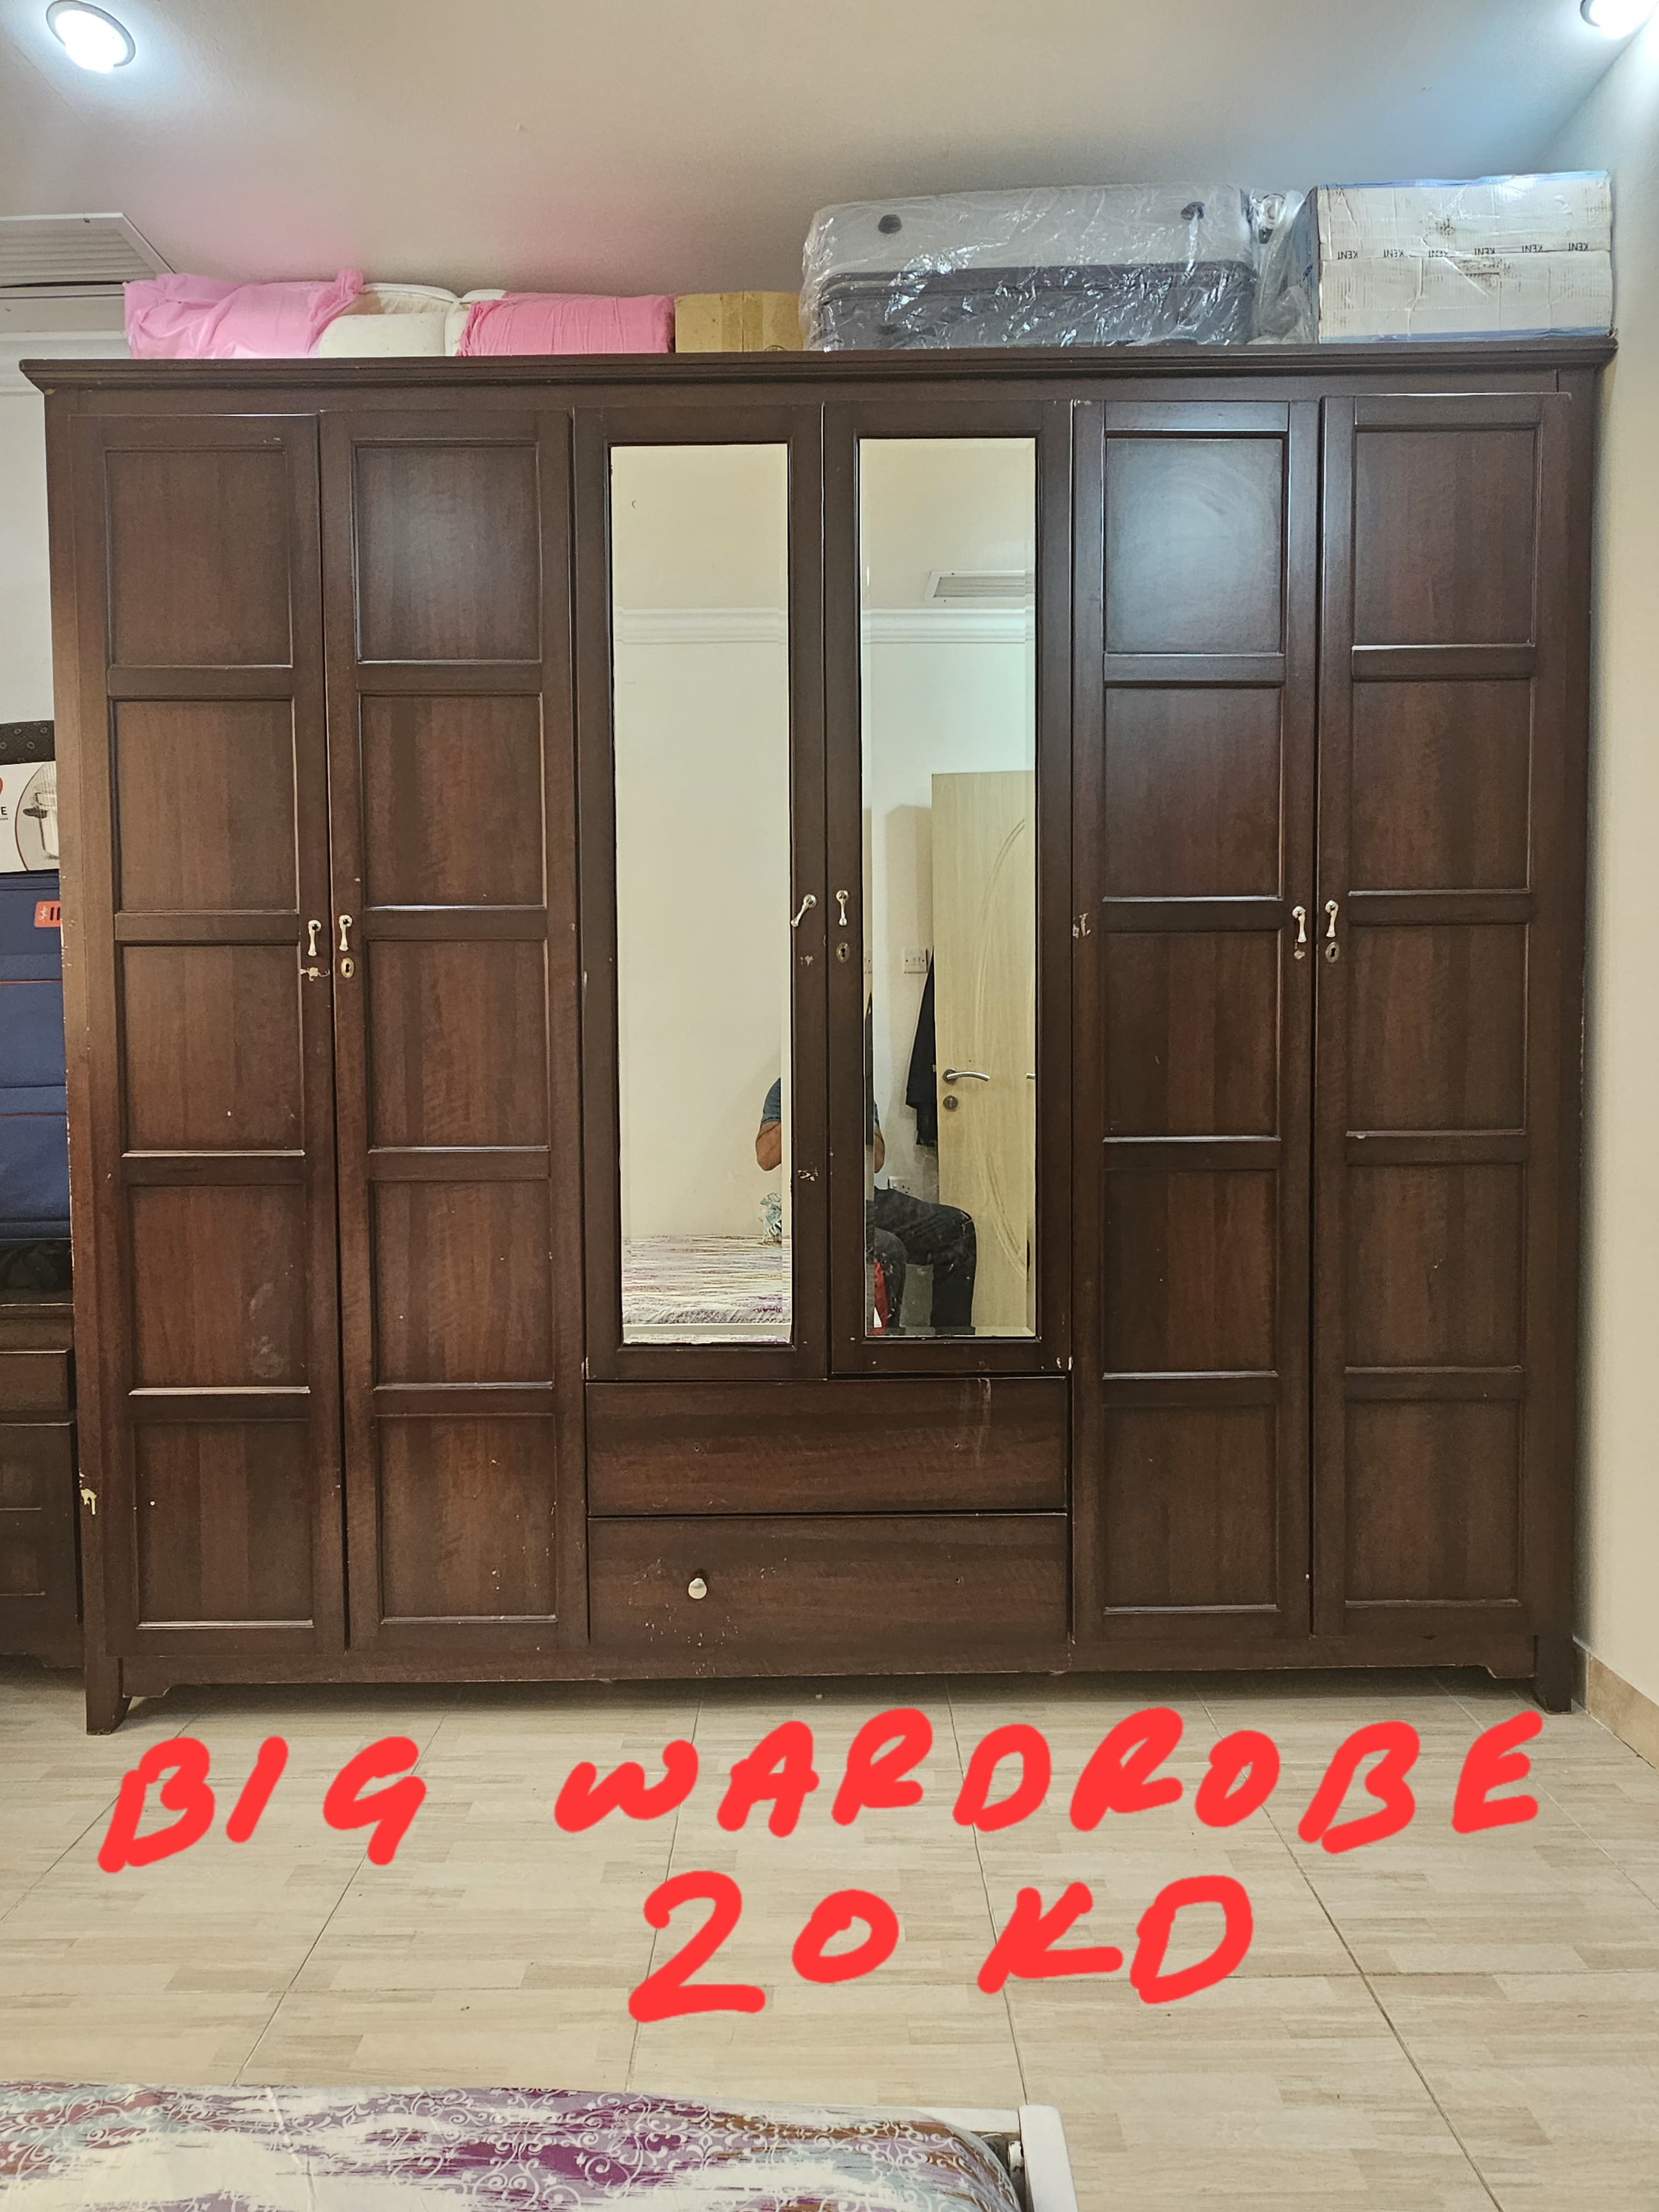 HOME FURNITURES ARE FOR SALE